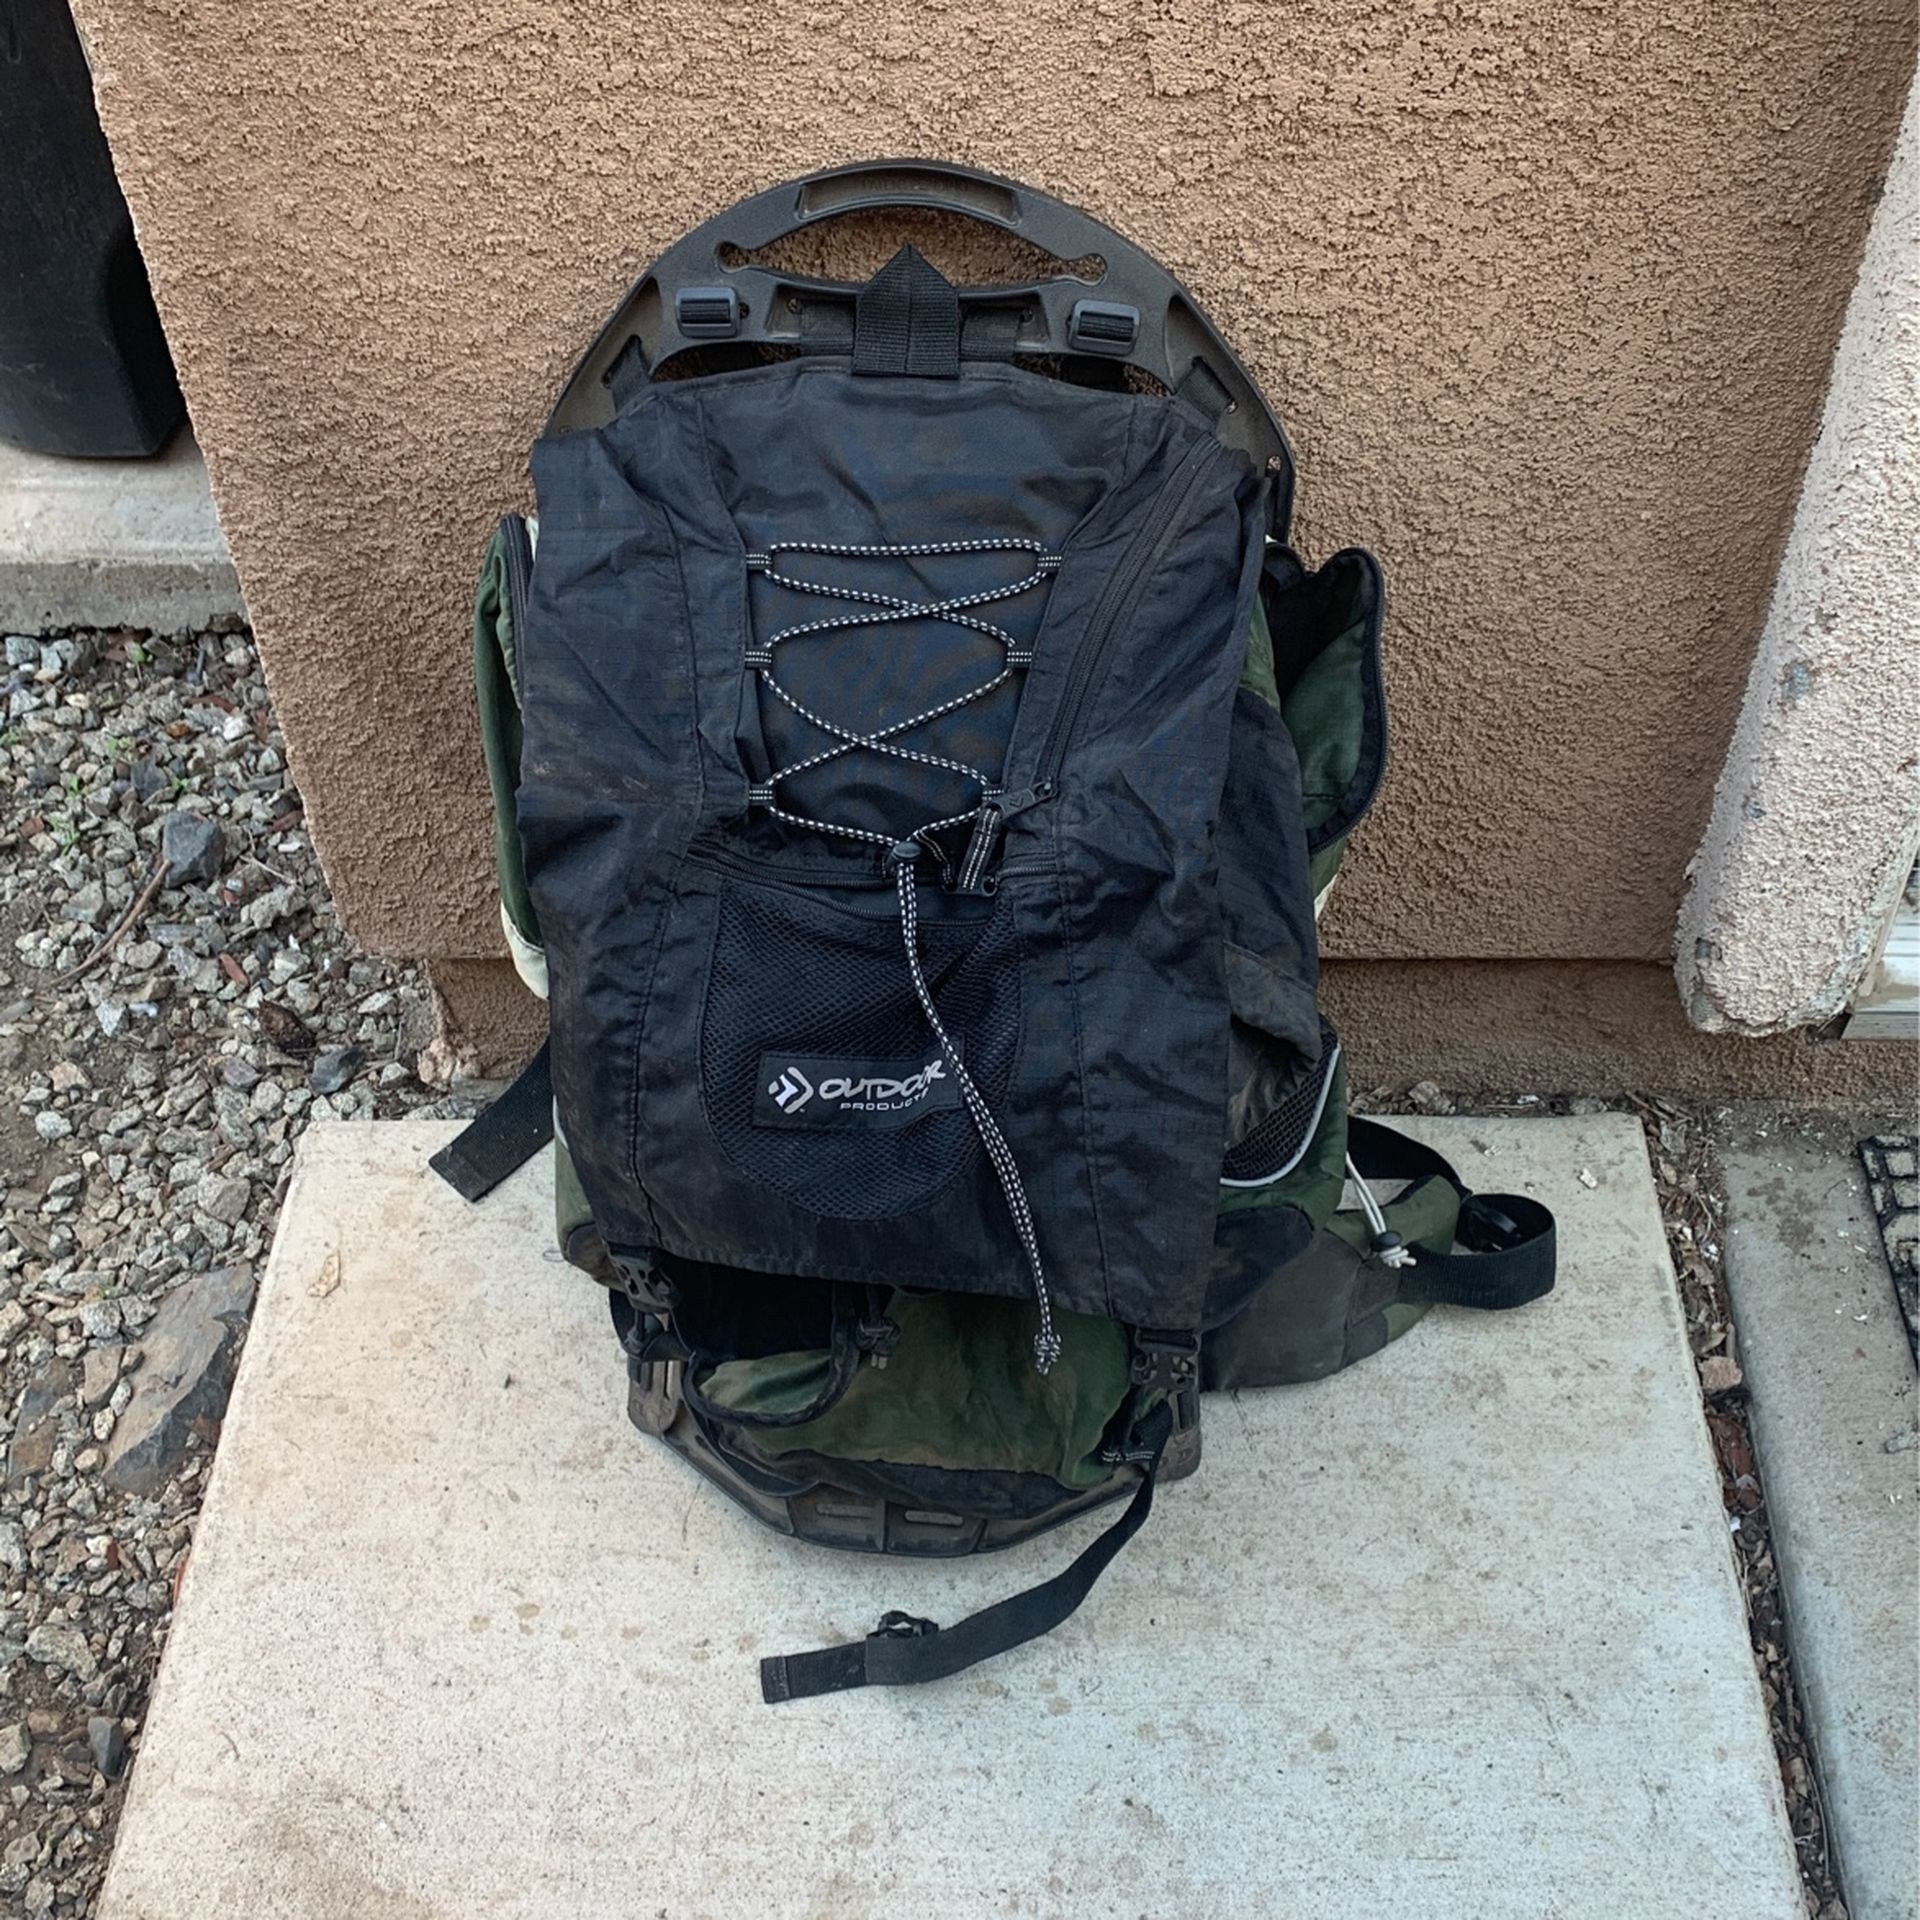 Backpacking backpack with frame